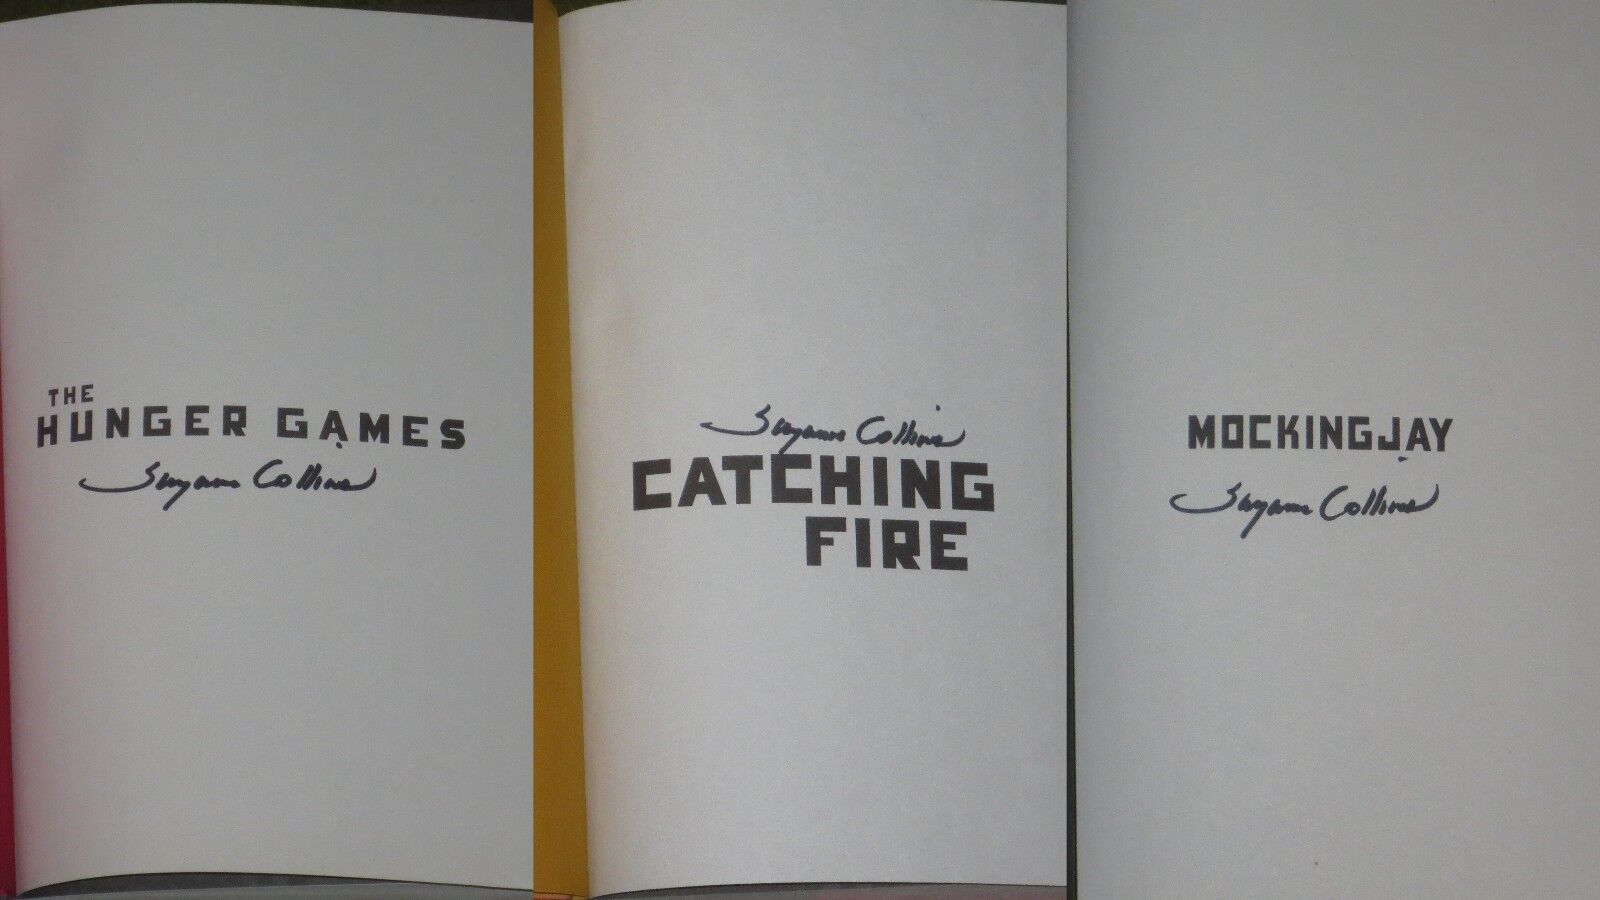 SUZANNE COLLINS THE HUNGER GAMES SIGNED  COMPLETE SET CATCHING FIRE EXACT PROOF